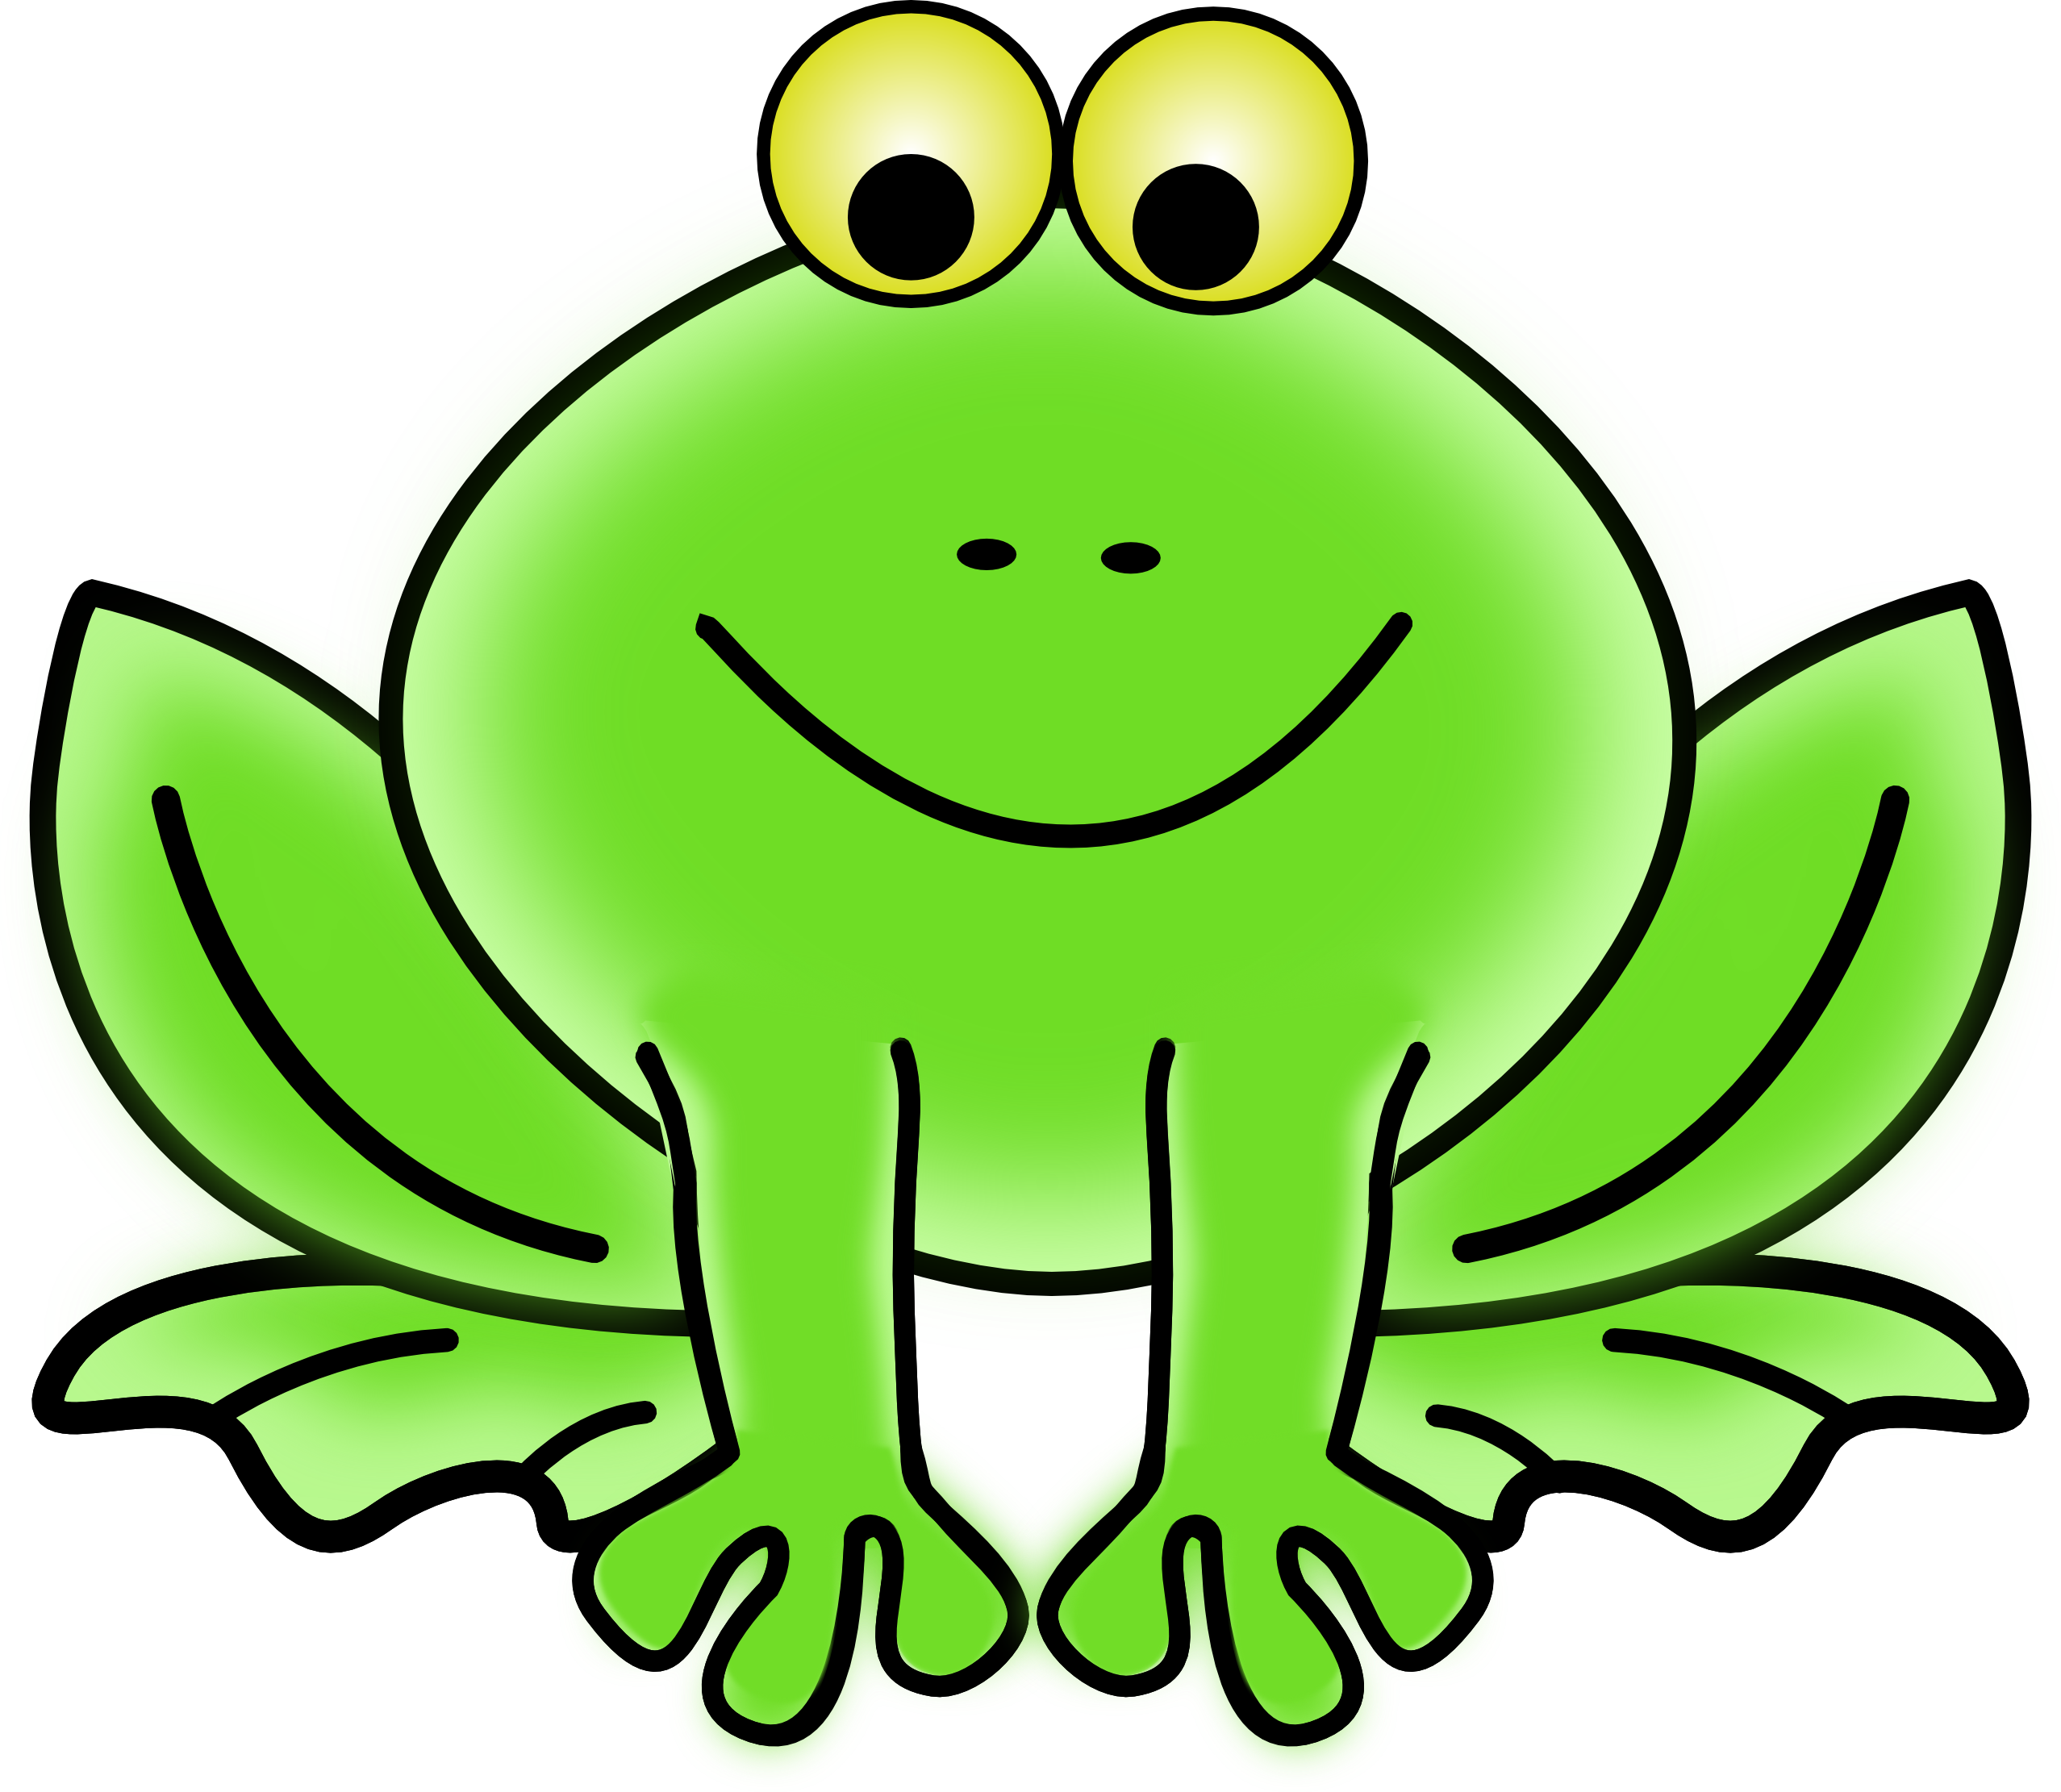 Frog Clipart Frog Clipart Frog Clipart Frog Clipart Frog Clipart